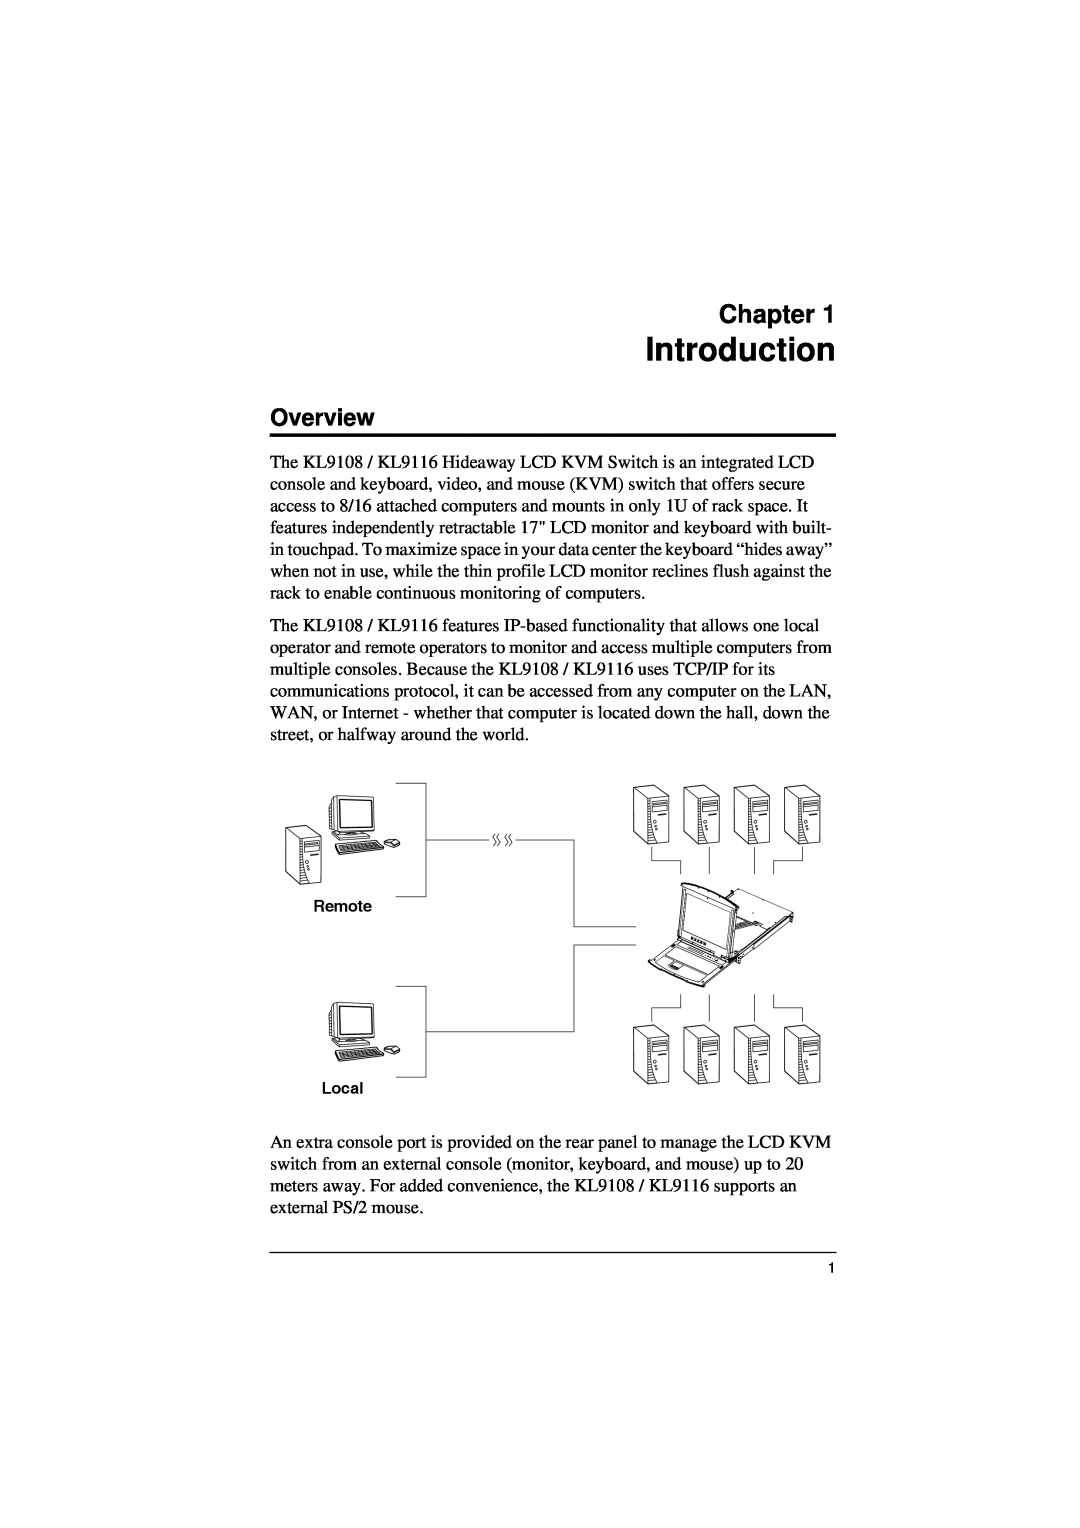 ATEN Technology KL9116, KL9108 user manual Introduction, Chapter, Overview 